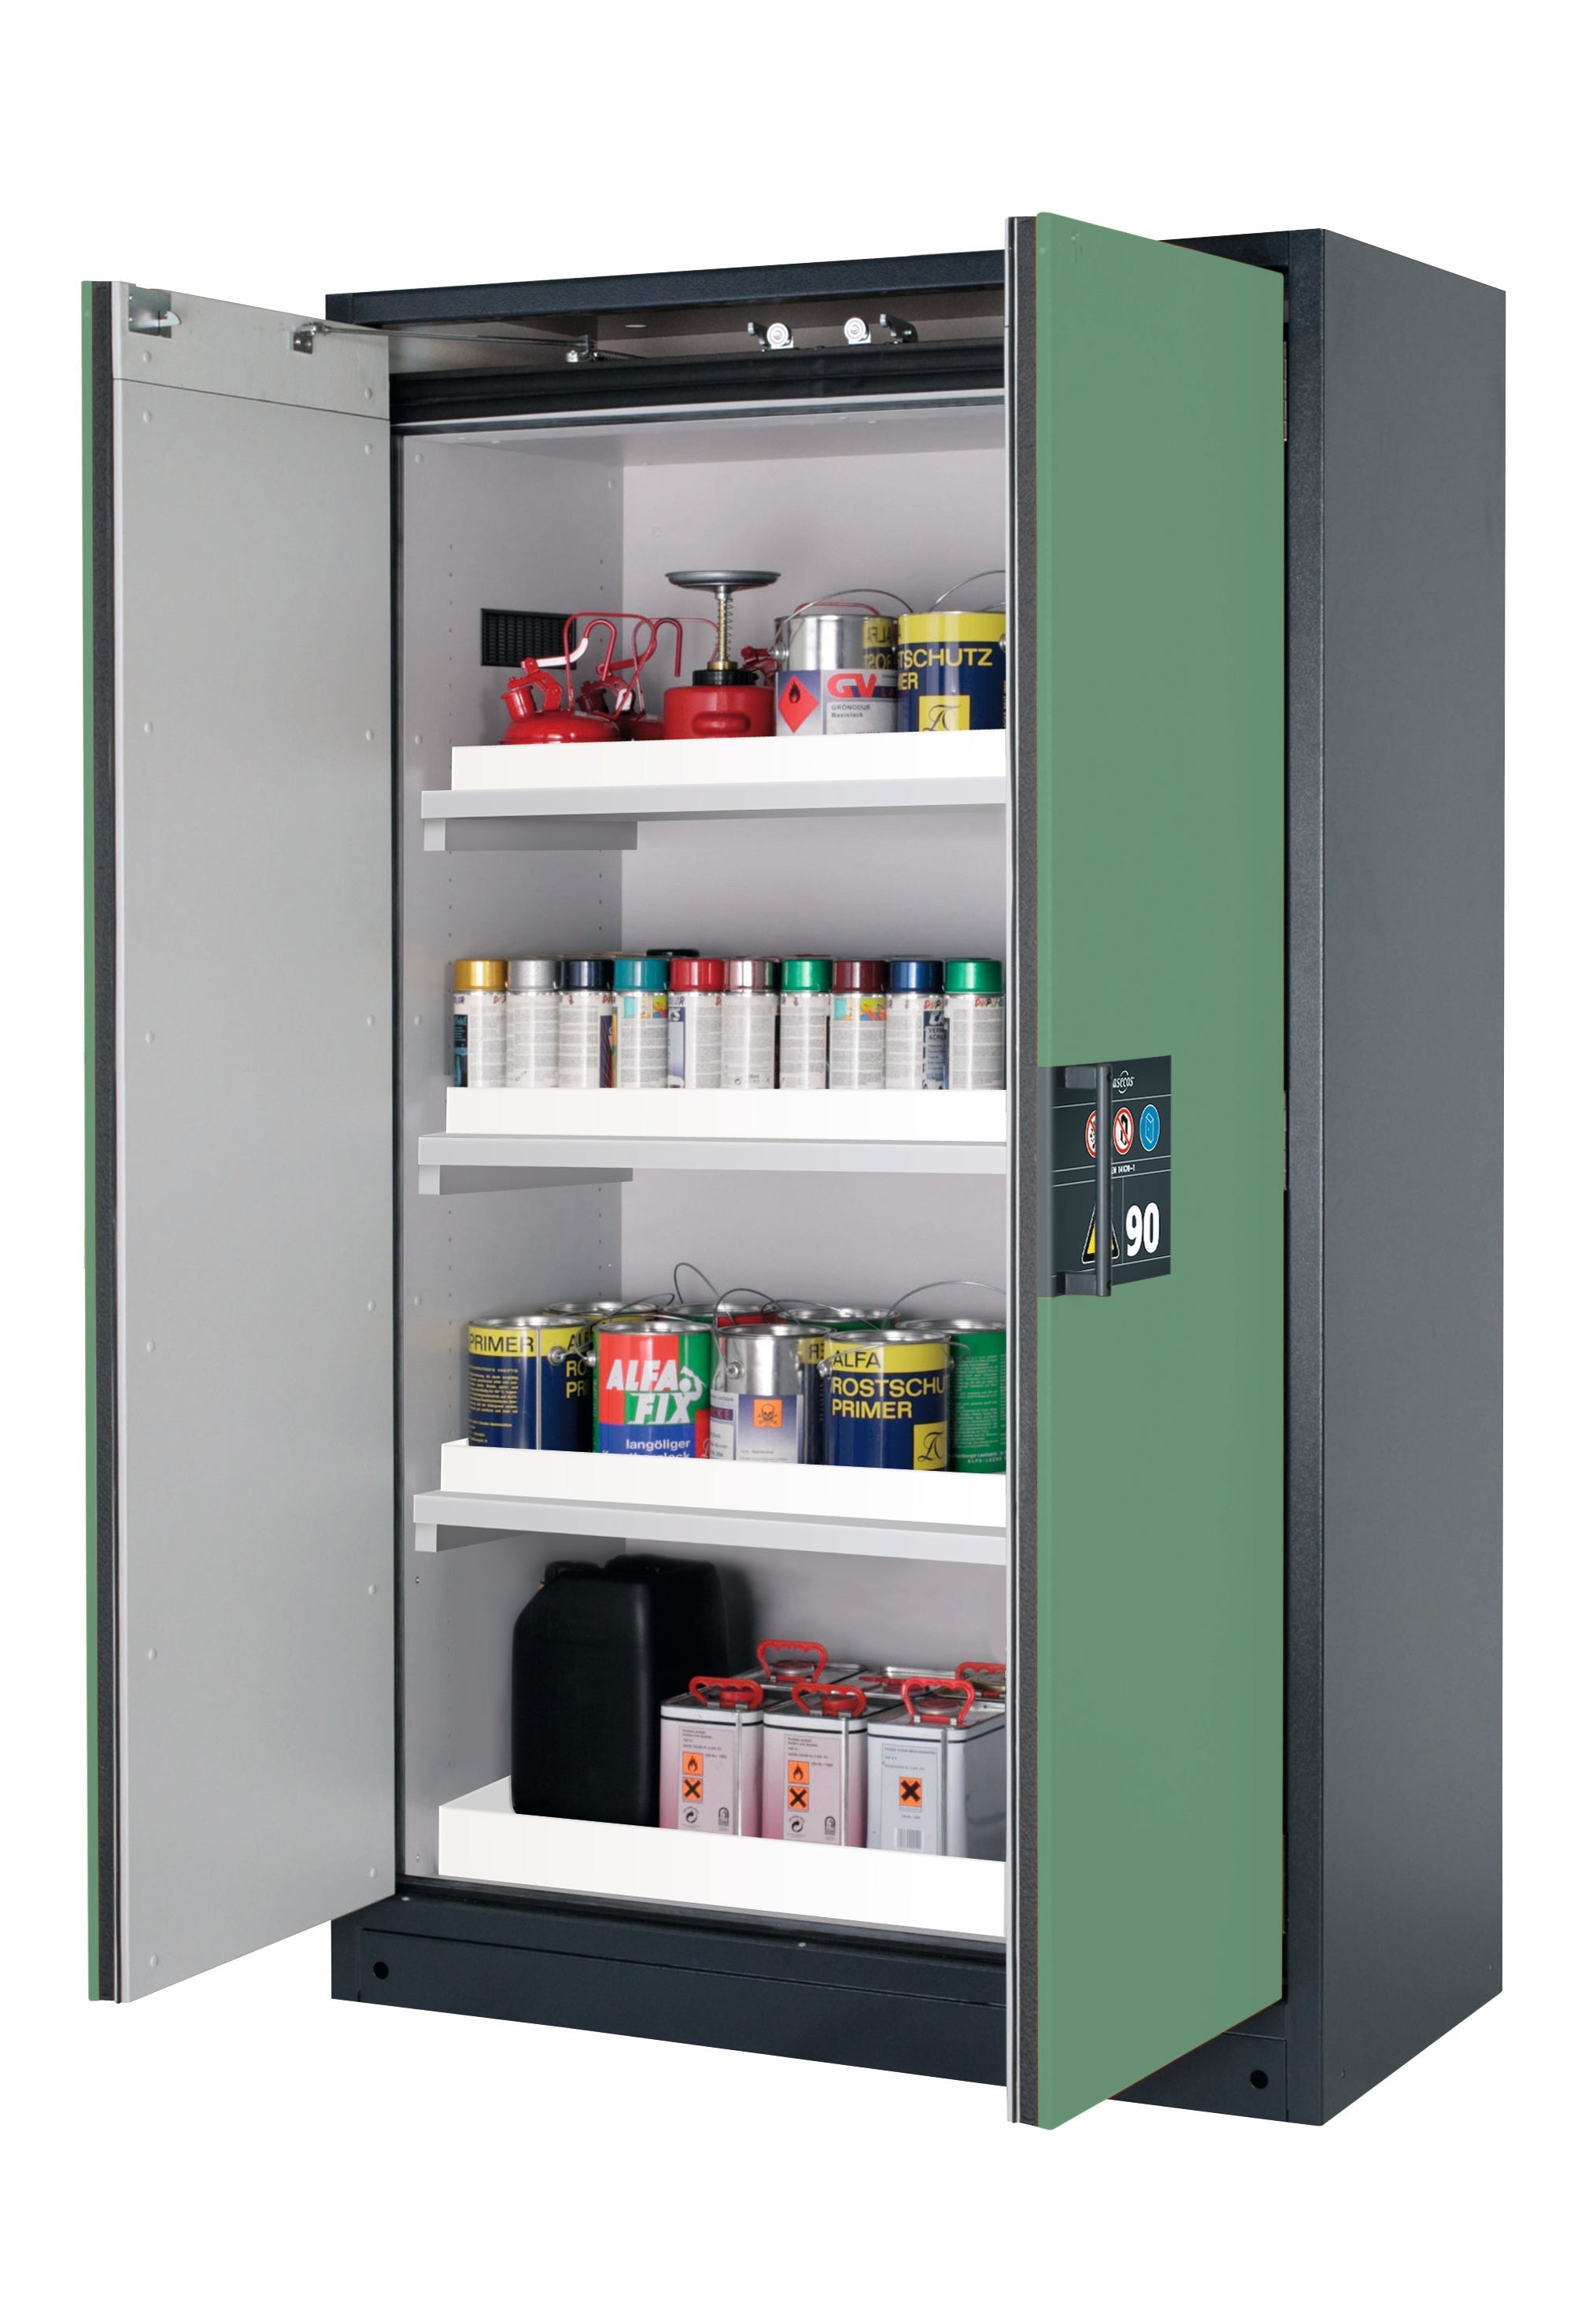 Type 90 safety storage cabinet Q-CLASSIC-90 model Q90.195.120 in reseda green RAL 6011 with 3x tray shelf (standard) (polypropylene),